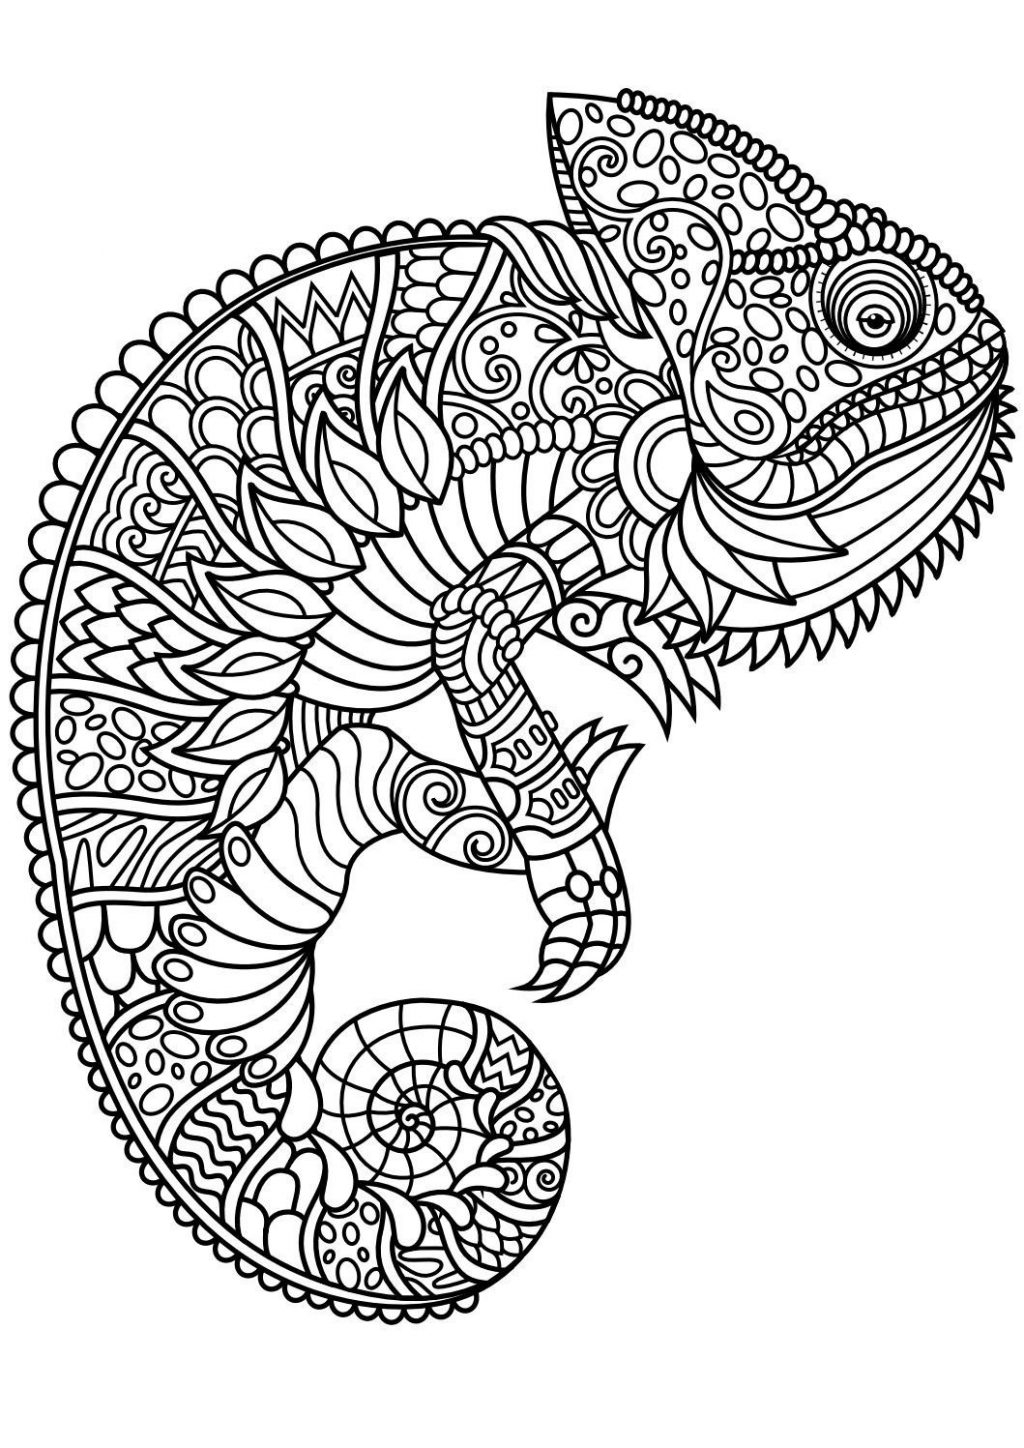 Coloring Pages Of Animals Hard Coloring Pages Coloring Pages Therapeutic For Adults To Print